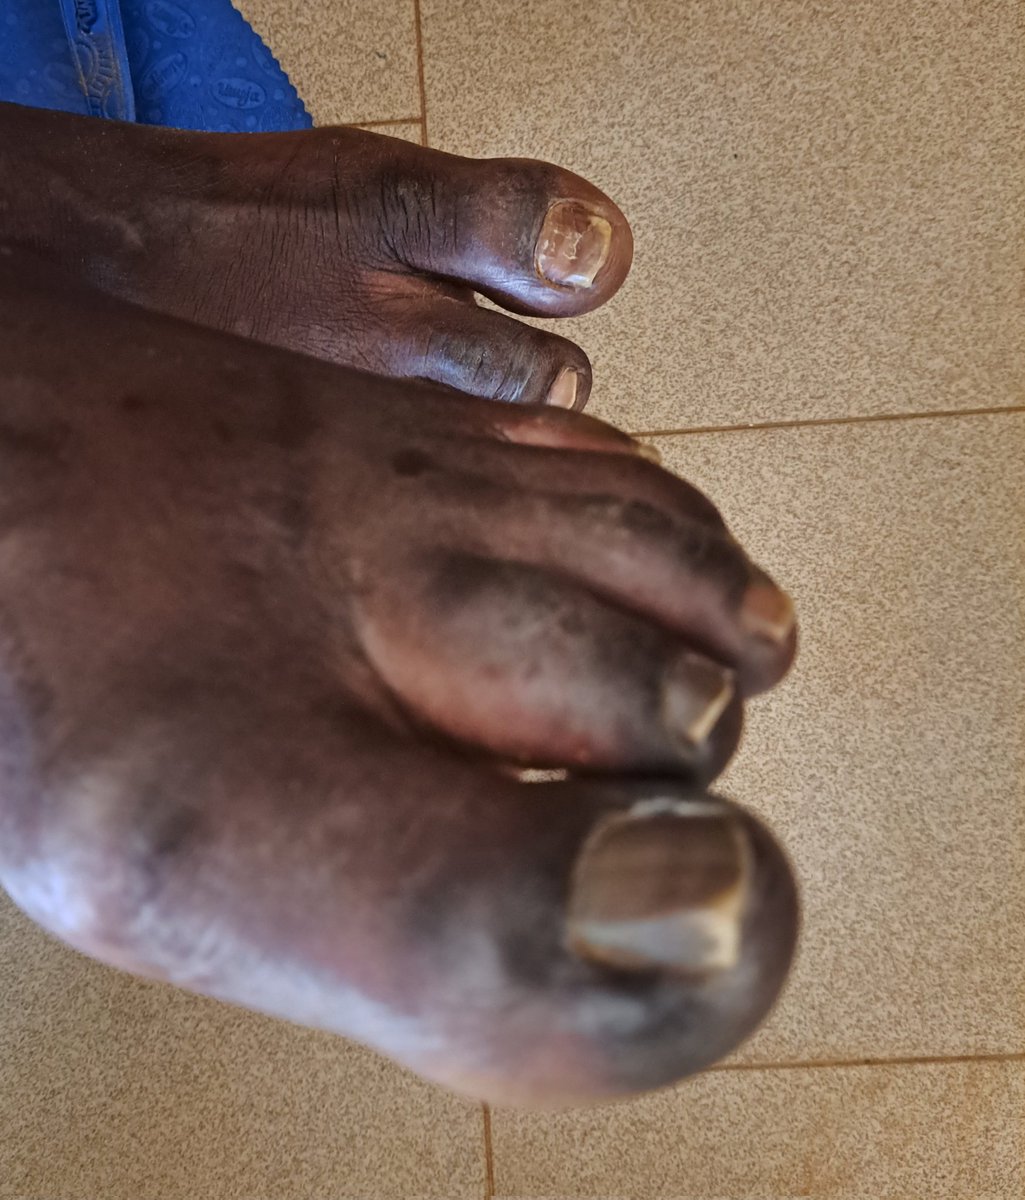 Differential Diagnosis? #HemeTwitter #dermtwitter #MedEd #MedTwitter #Rheumatology #Immunology
27y/M no known chronic illness history of fever & GBW, and 2days h/o painful small joints & darkening of the digits.